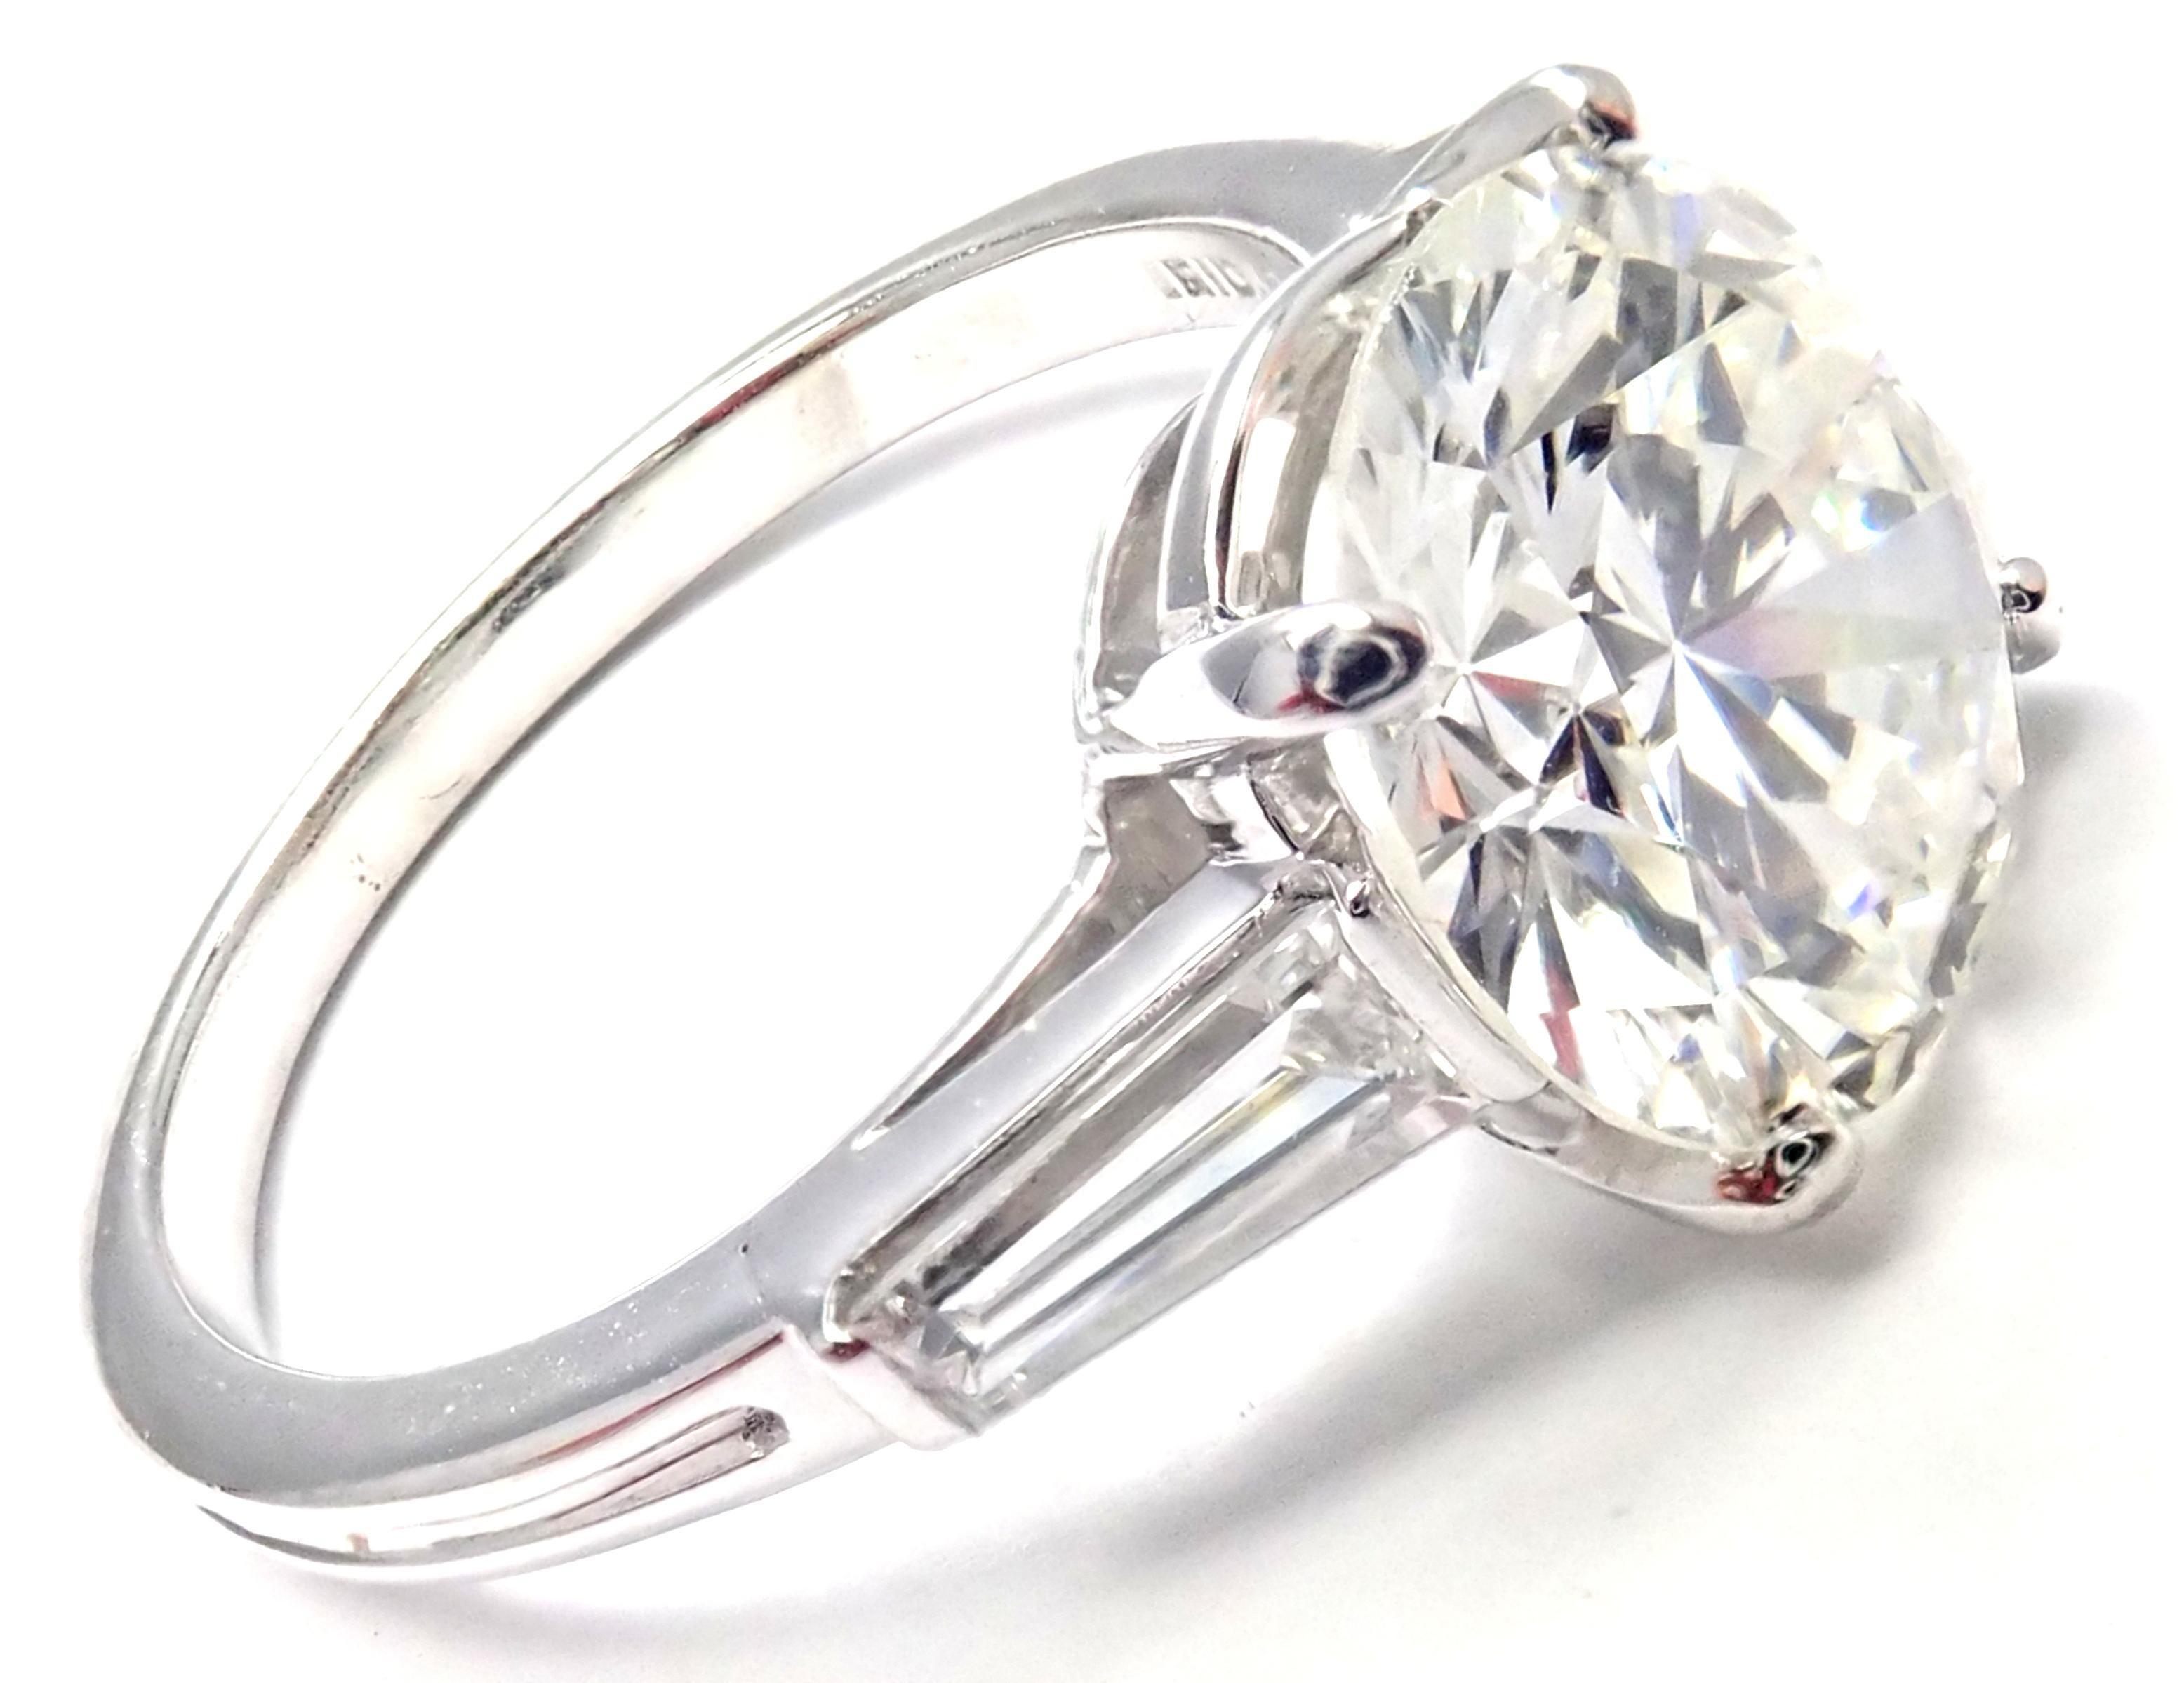 Platinum Diamond Engagement Ring by Tiffany & Co. 
With 1 round brilliant cut diamond in the center G color, VS1 clarity weight 2.488ct
2 baguette diamonds VS1 clarity, G color total weight approx. .30ct
This ring comes with diamond report from